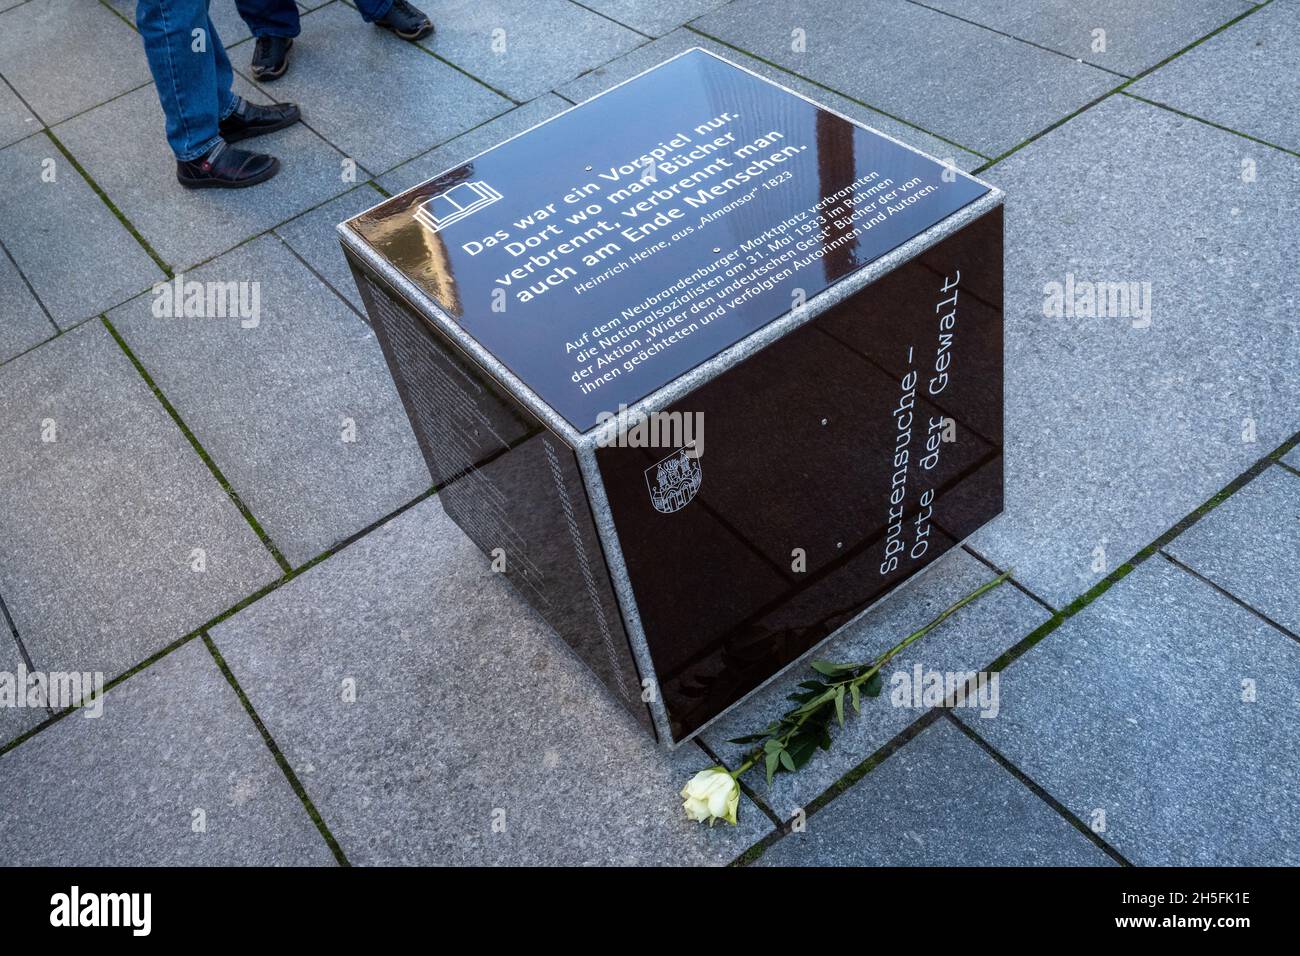 09 November 2021, Mecklenburg-Western Pomerania, Neubrandenburg: From  Tuesday, a memorial sign on Neubrandenburg's market square will commemorate  the burning of books by the National Socialists in May 1933. The memorial  sign was